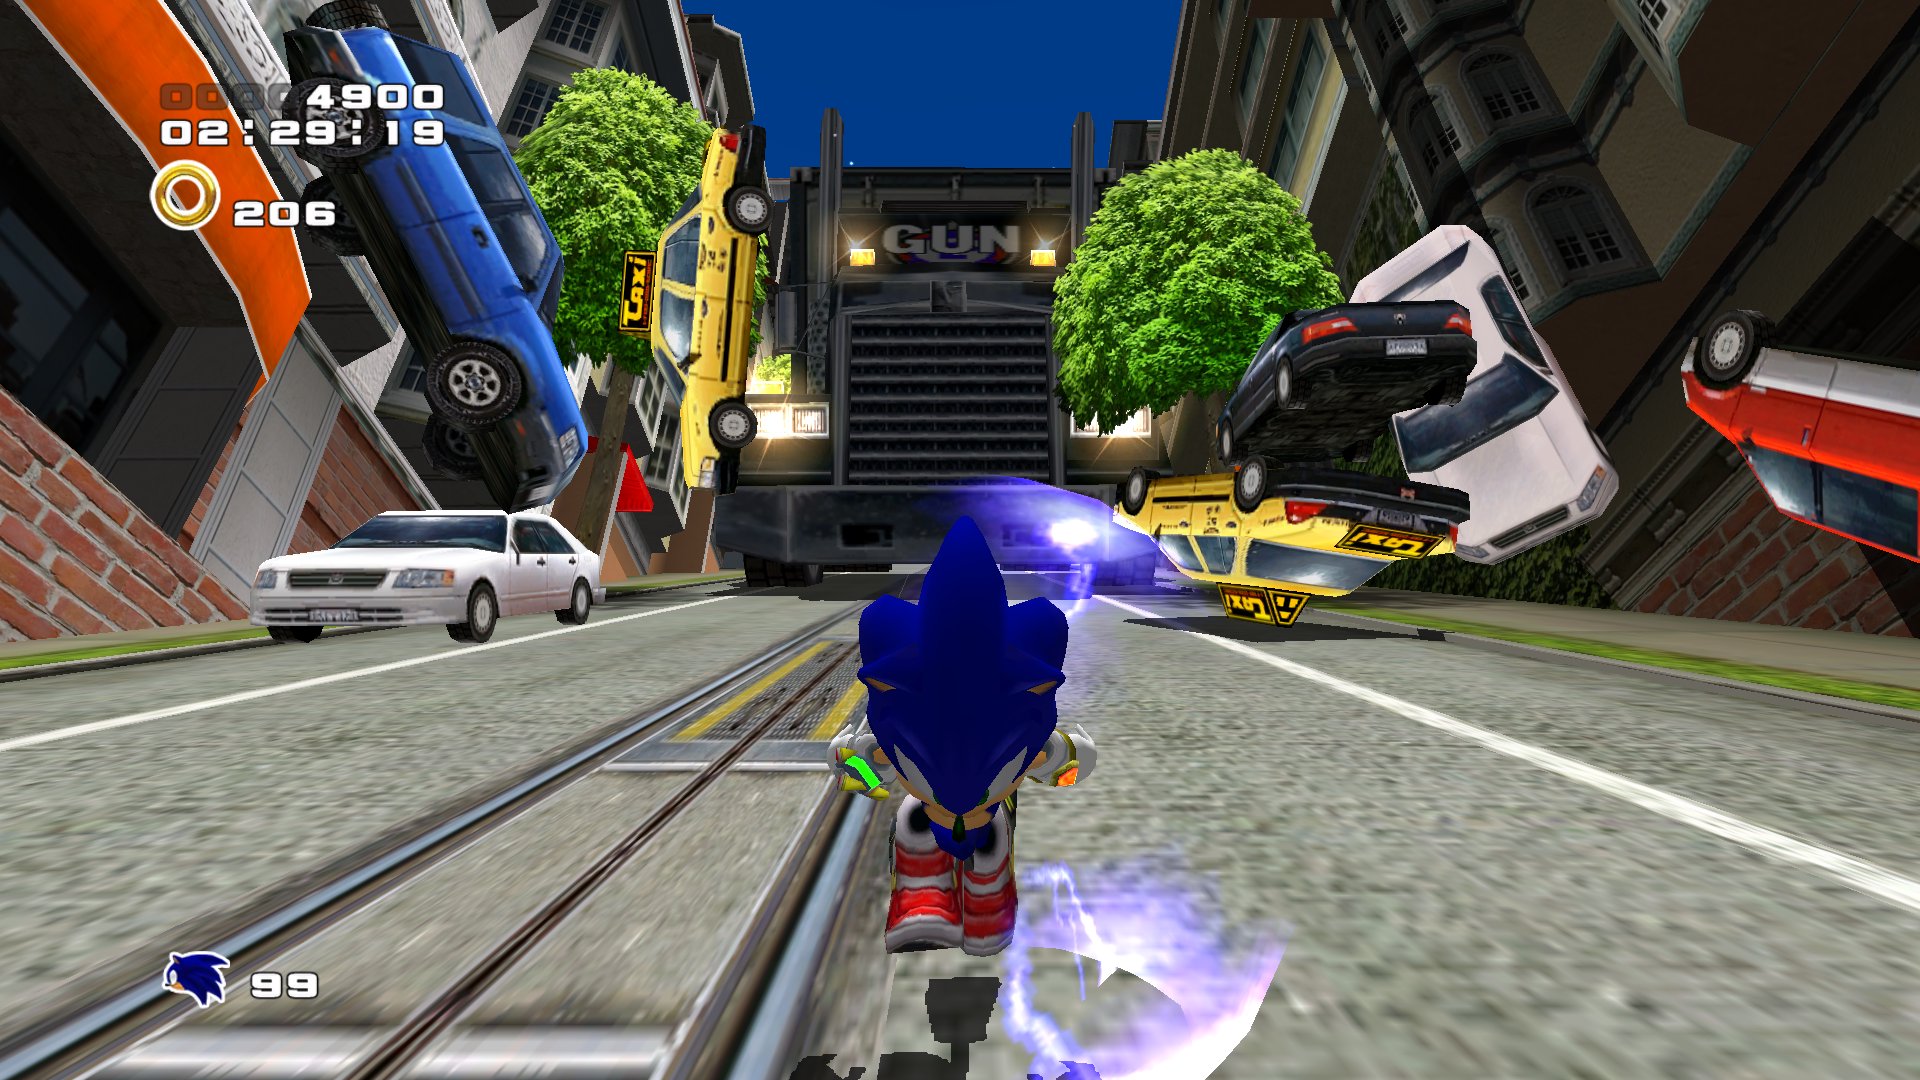 Sonic Frontiers is one of the weirdest games I've played